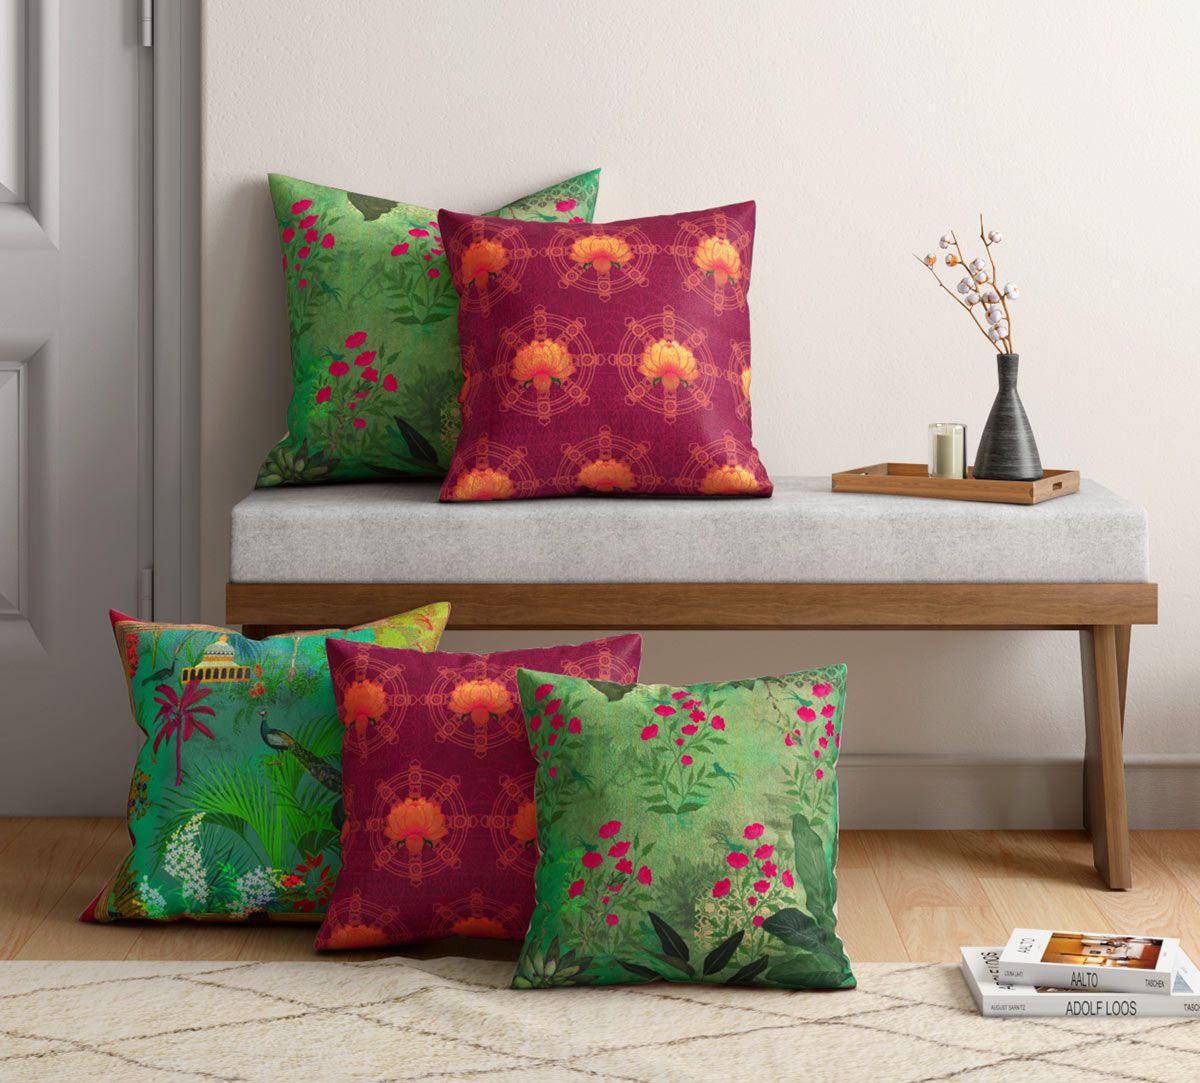 India Circus by Krsnaa Mehta Floral Mystique Satin Blend Cushion Cover Set of 5